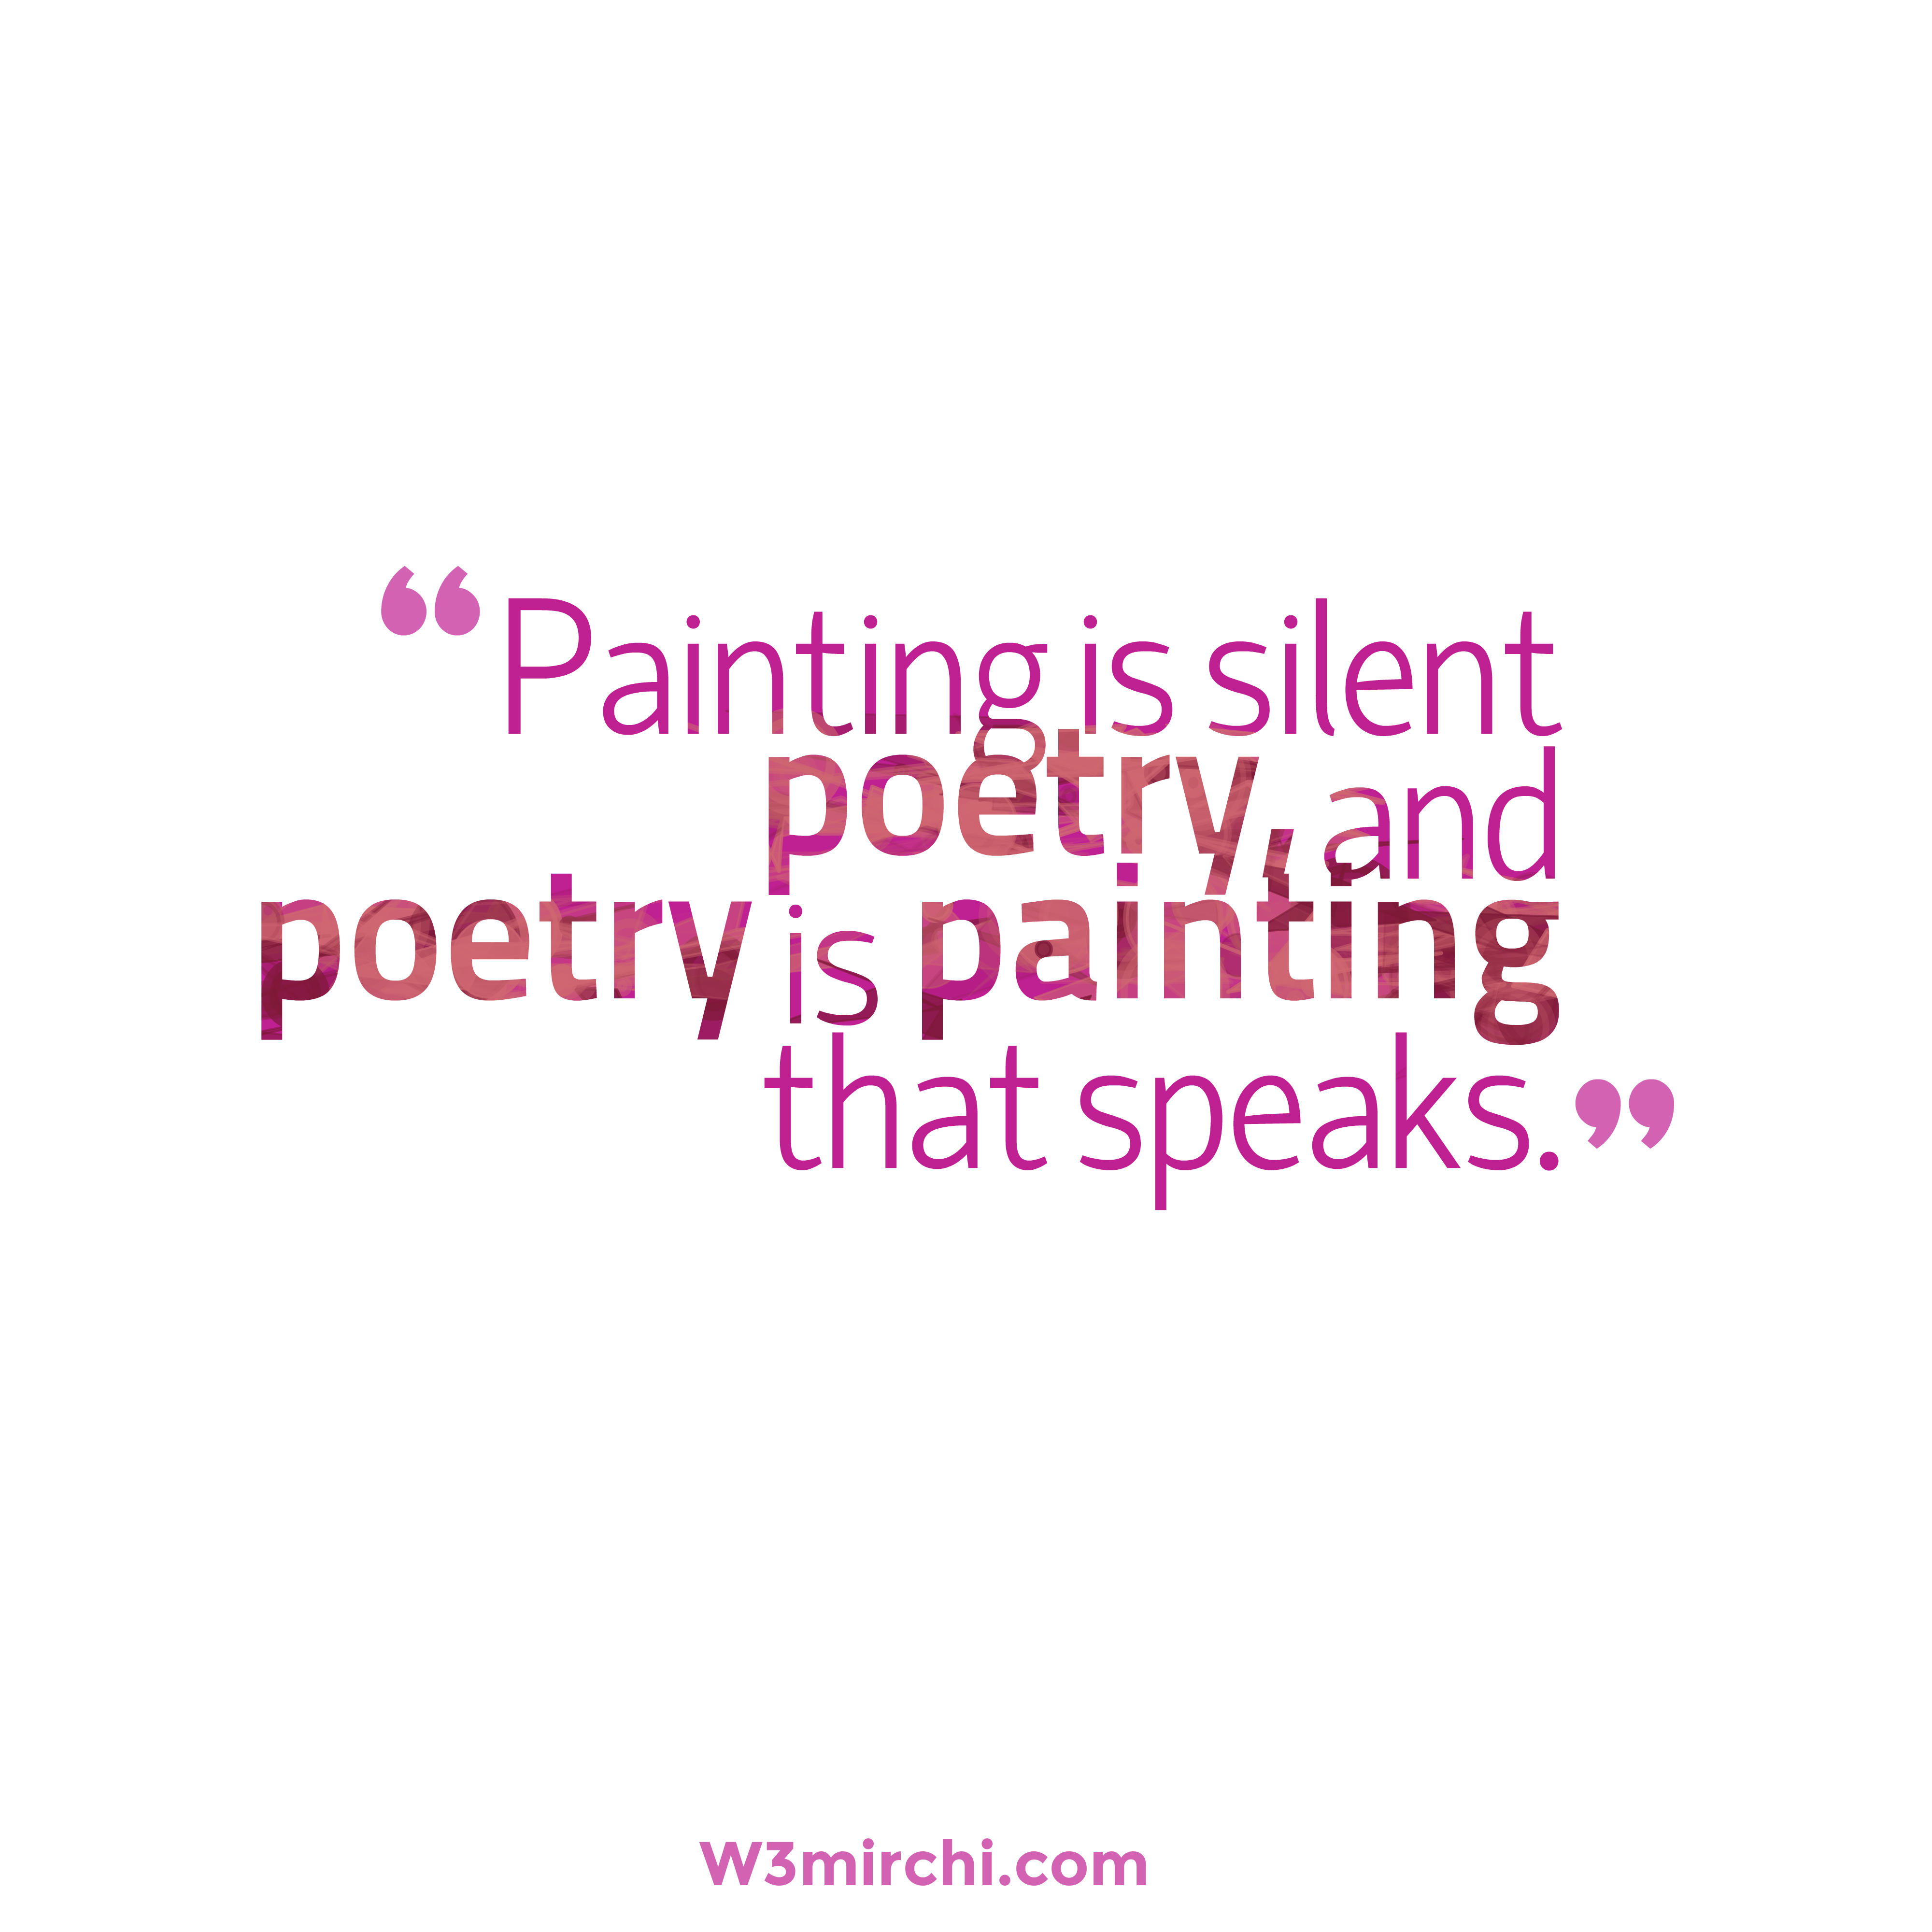 “Painting is silent poetry,